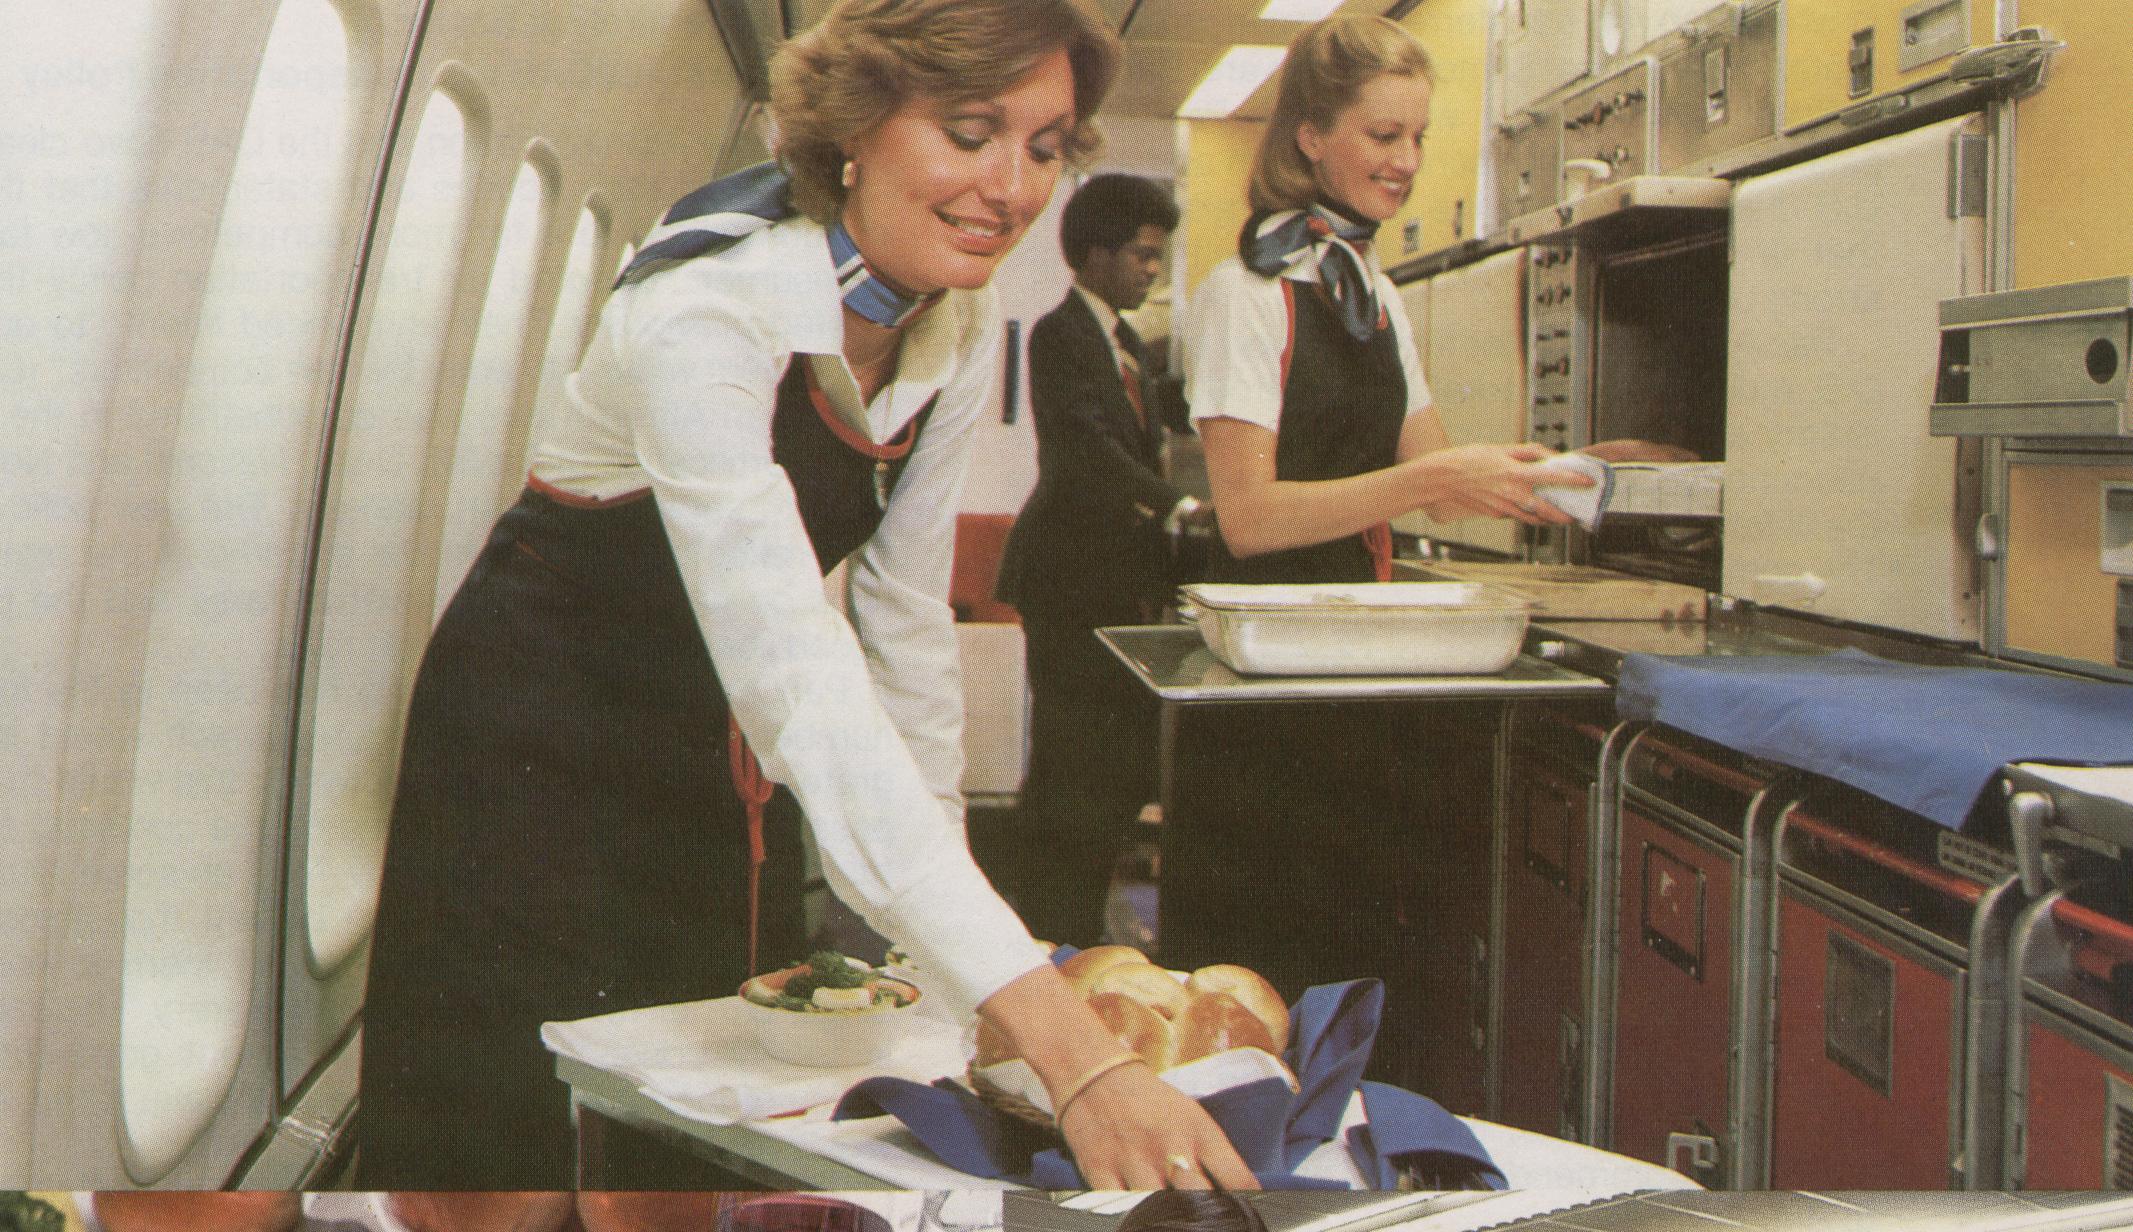 1977,  Flight Attendants preparing to serve an elaborate First Class meal in the galley of a Pan Am Boeing 747SP.  Sue Smith is preparing the serving cart.  Judy Skartvedt is standing by the open oven and Antonio Gooding is working at the back of the galley.  